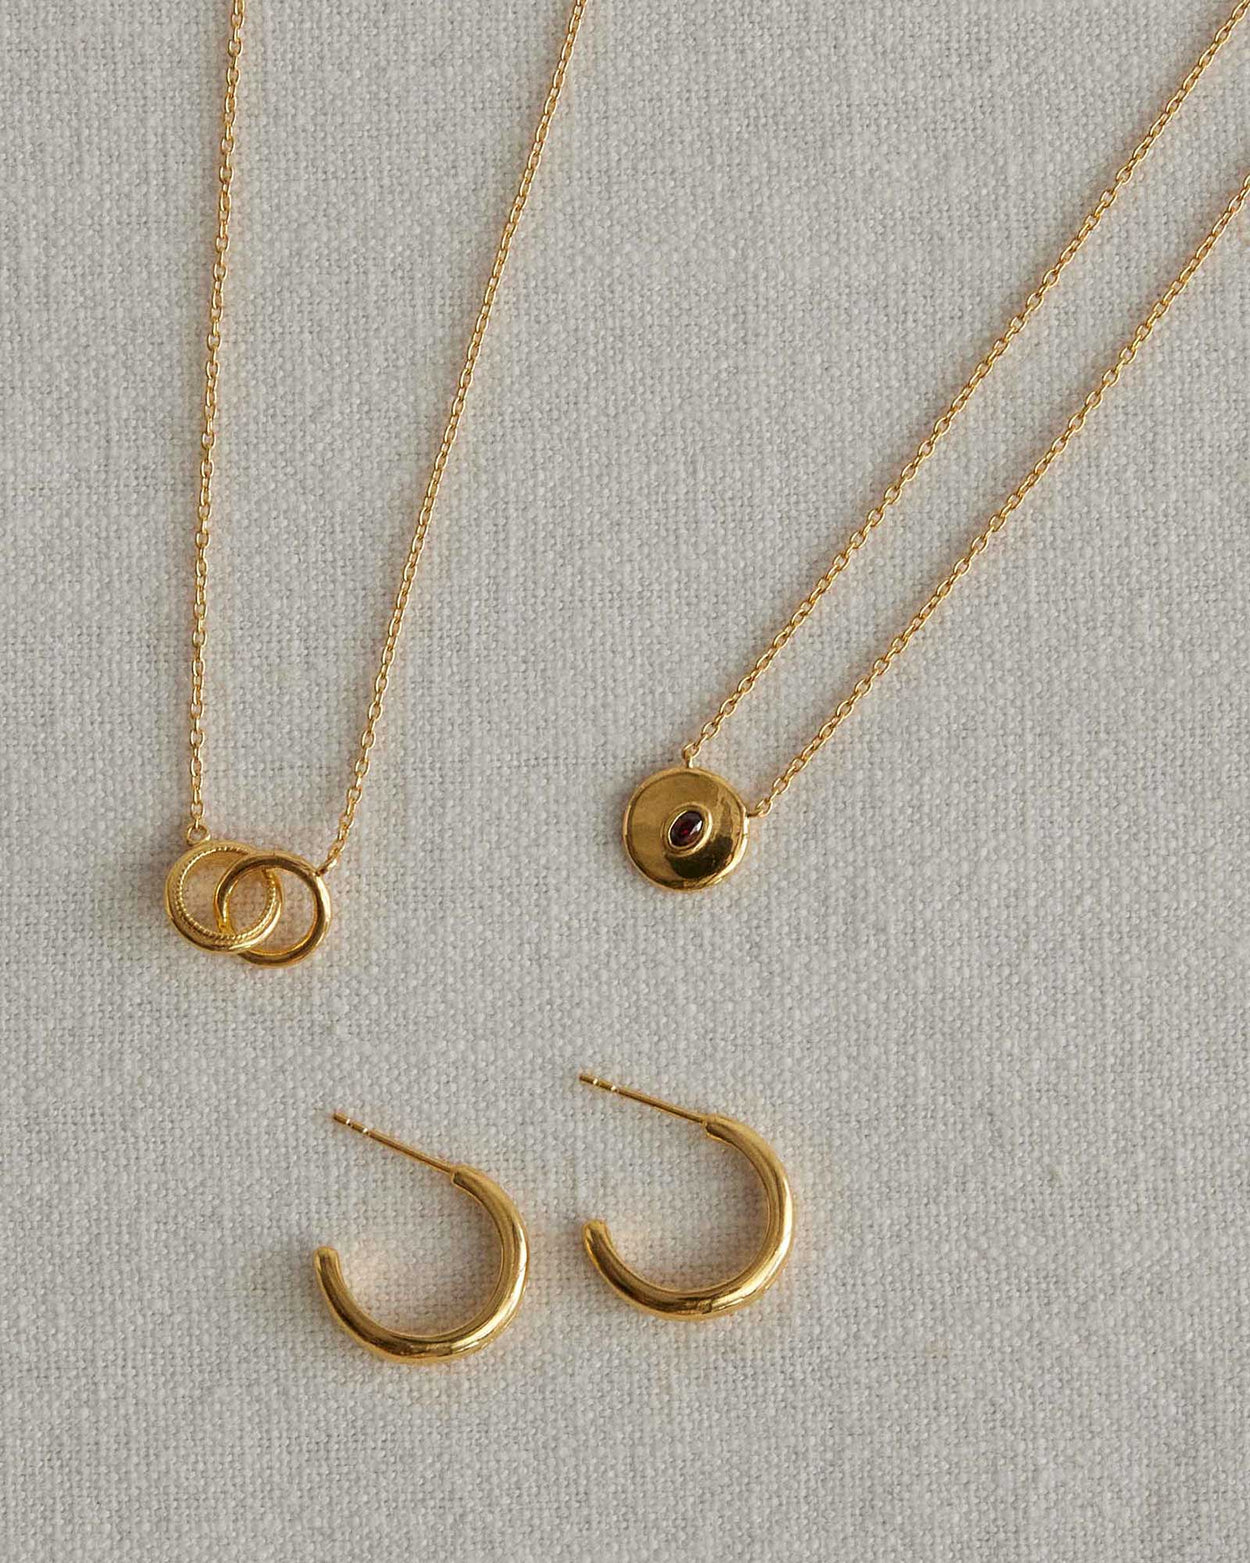 GRACE INFINITY HOOPS (18K GOLD PLATED)